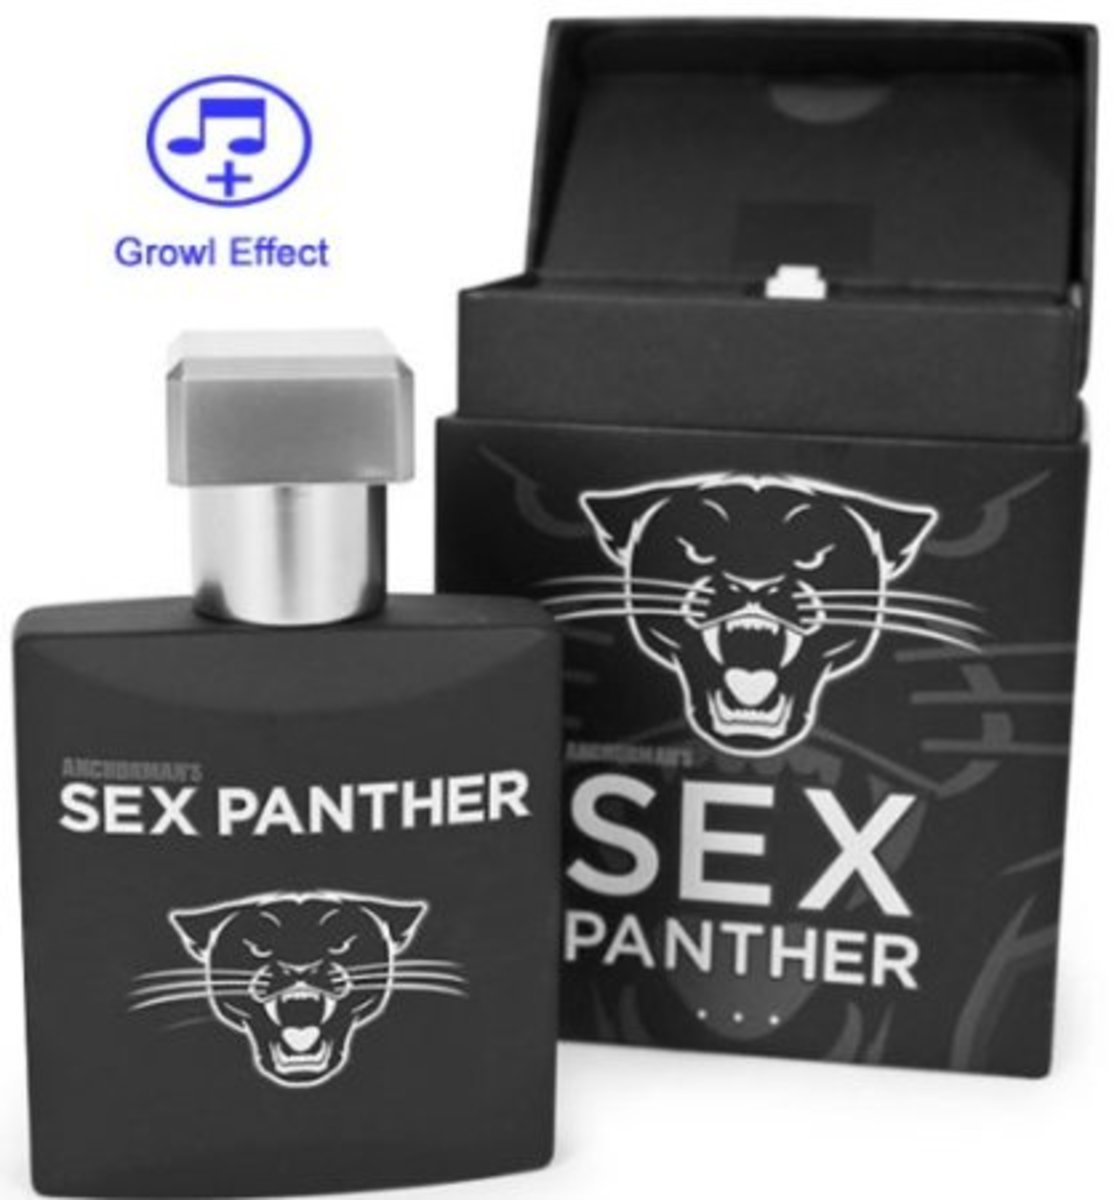 "Actual" Sex Panther cologne...